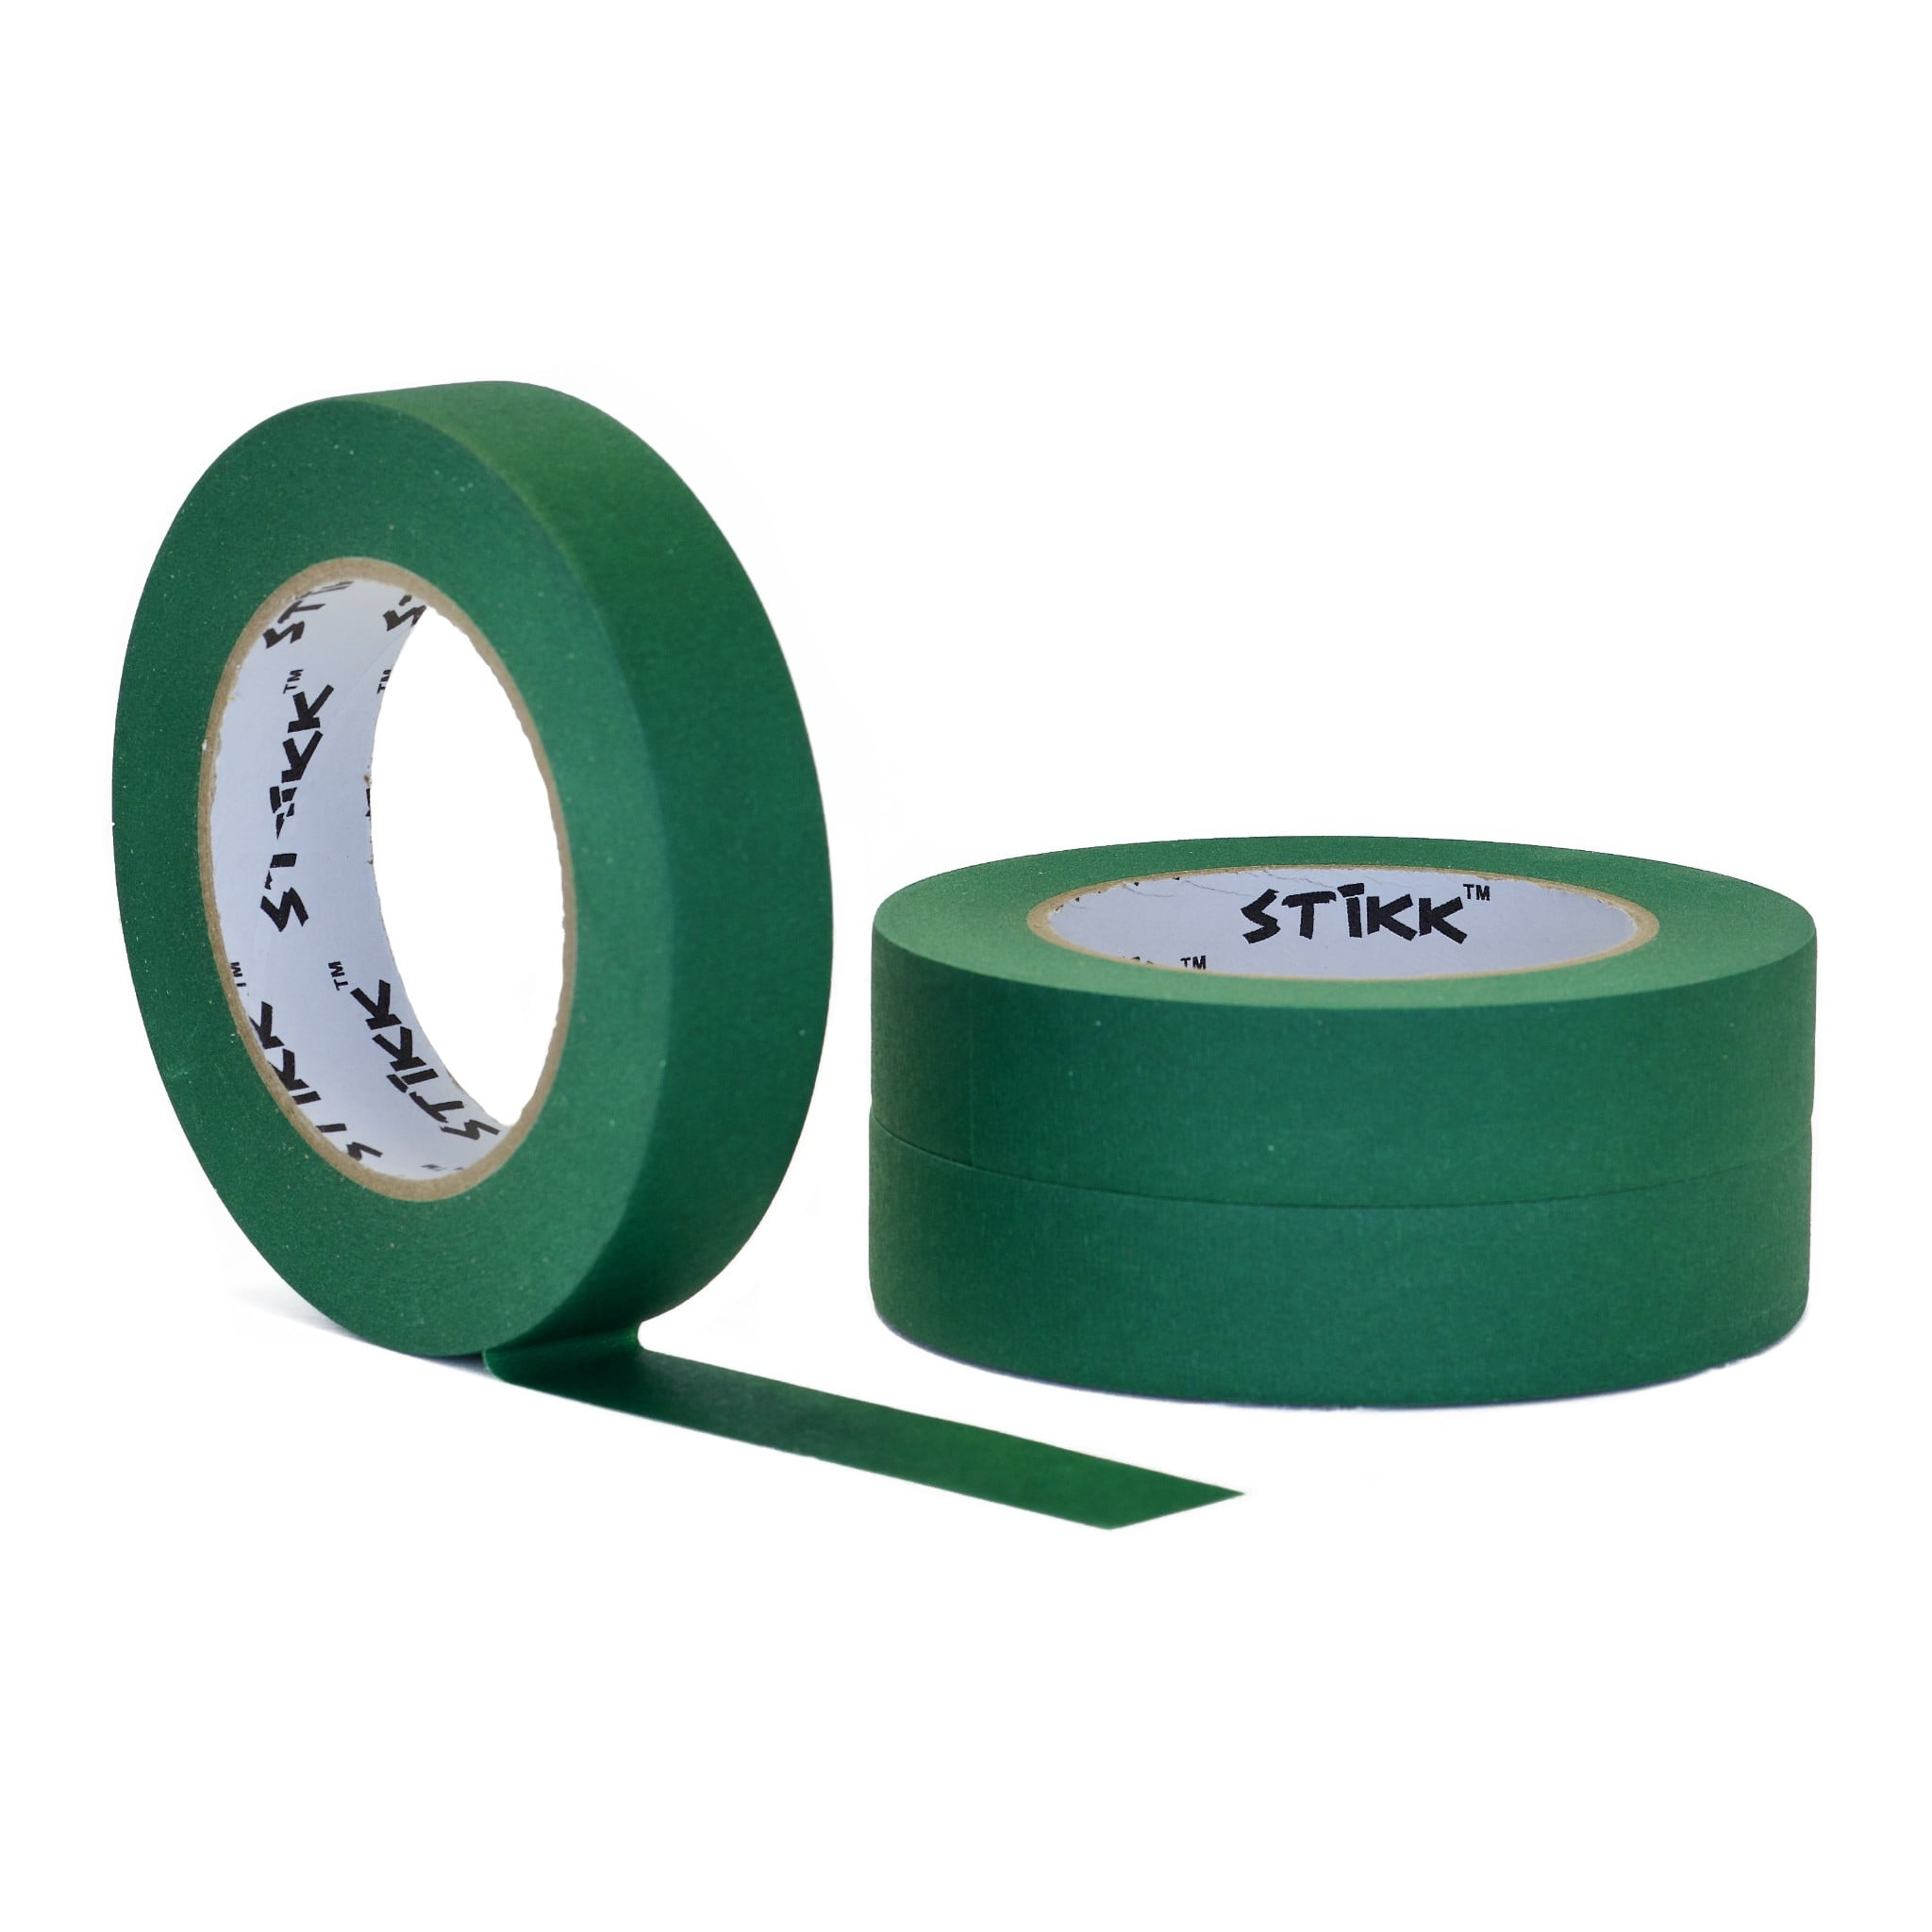 2pk 1 in x 60yd Green Masking Tape Extra Sticky PRO Grade High Stick Special Project Painters Tape Painting Trim Arts Crafts School Home Office 21 Days 24MM x 55M .94 inch Evergreen Dark 